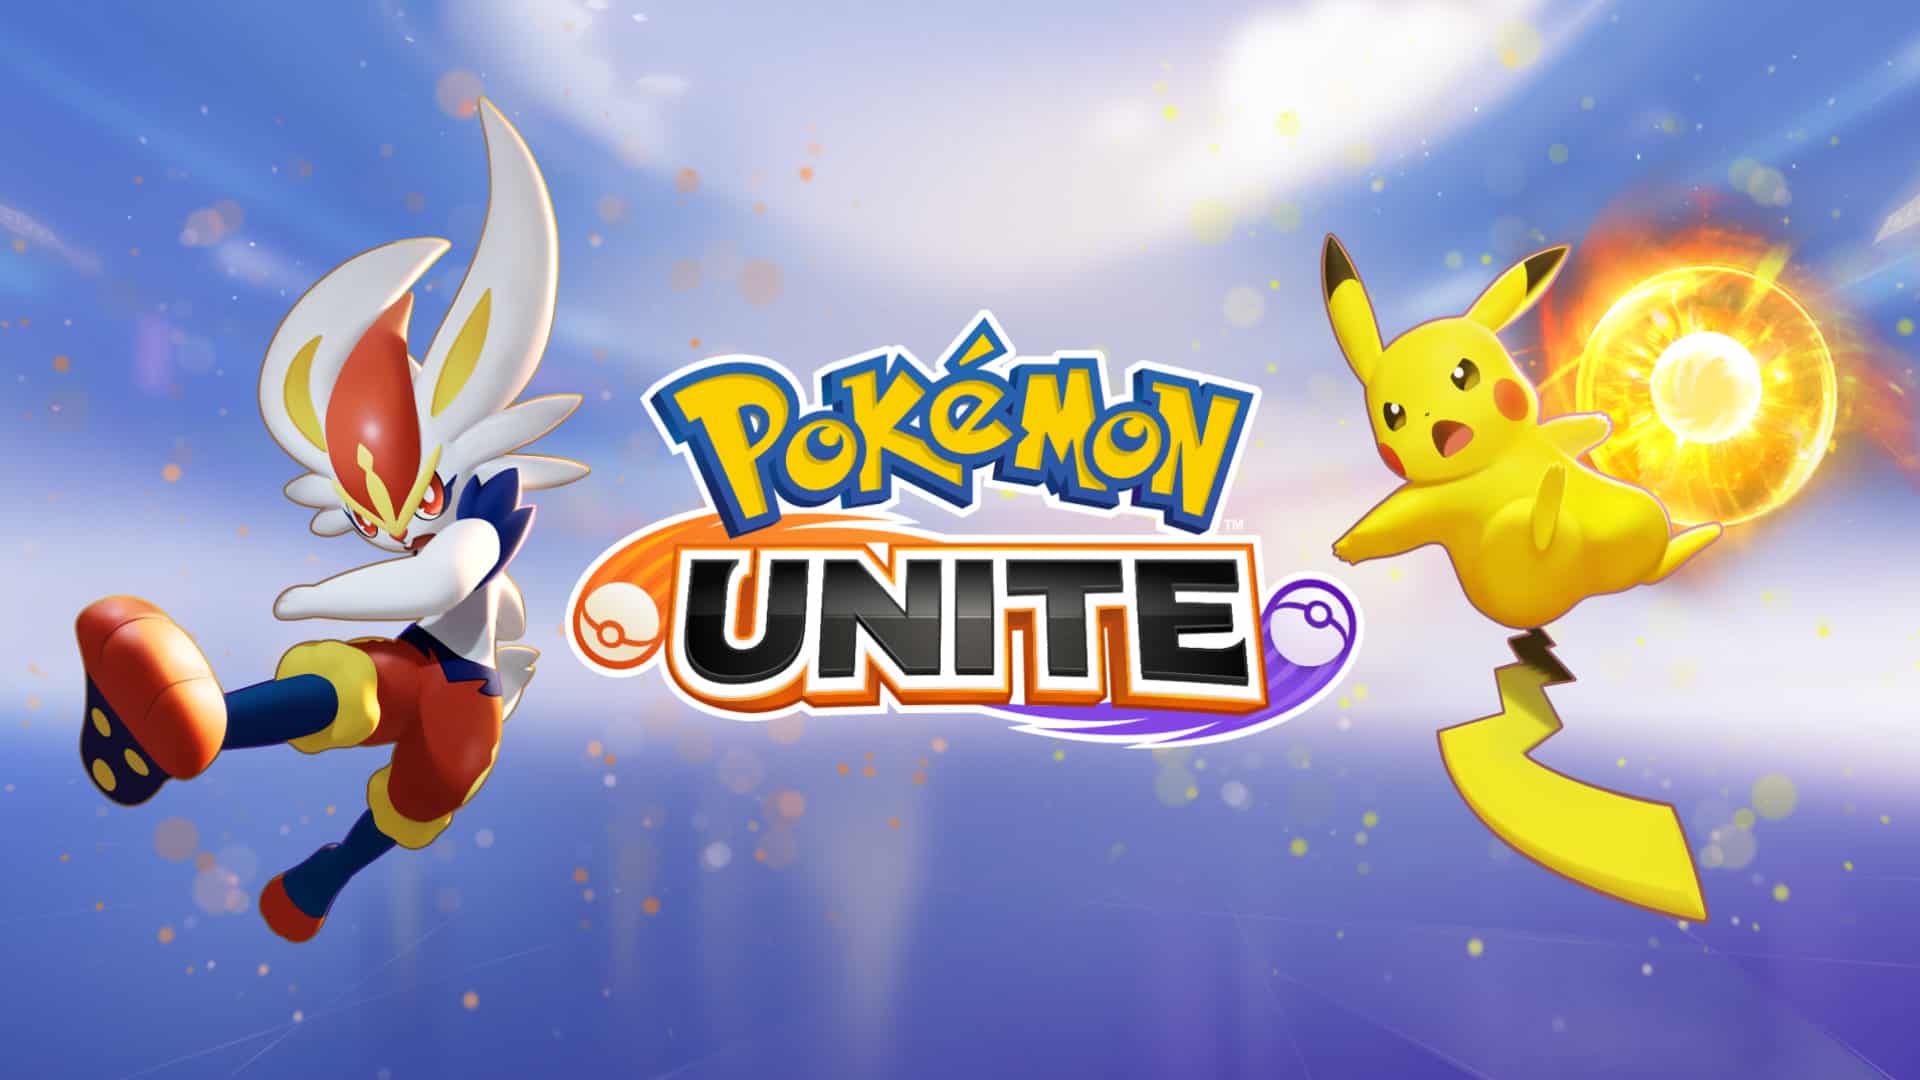 Pokémon Unite dated for July 21 launch on Nintendo Switch